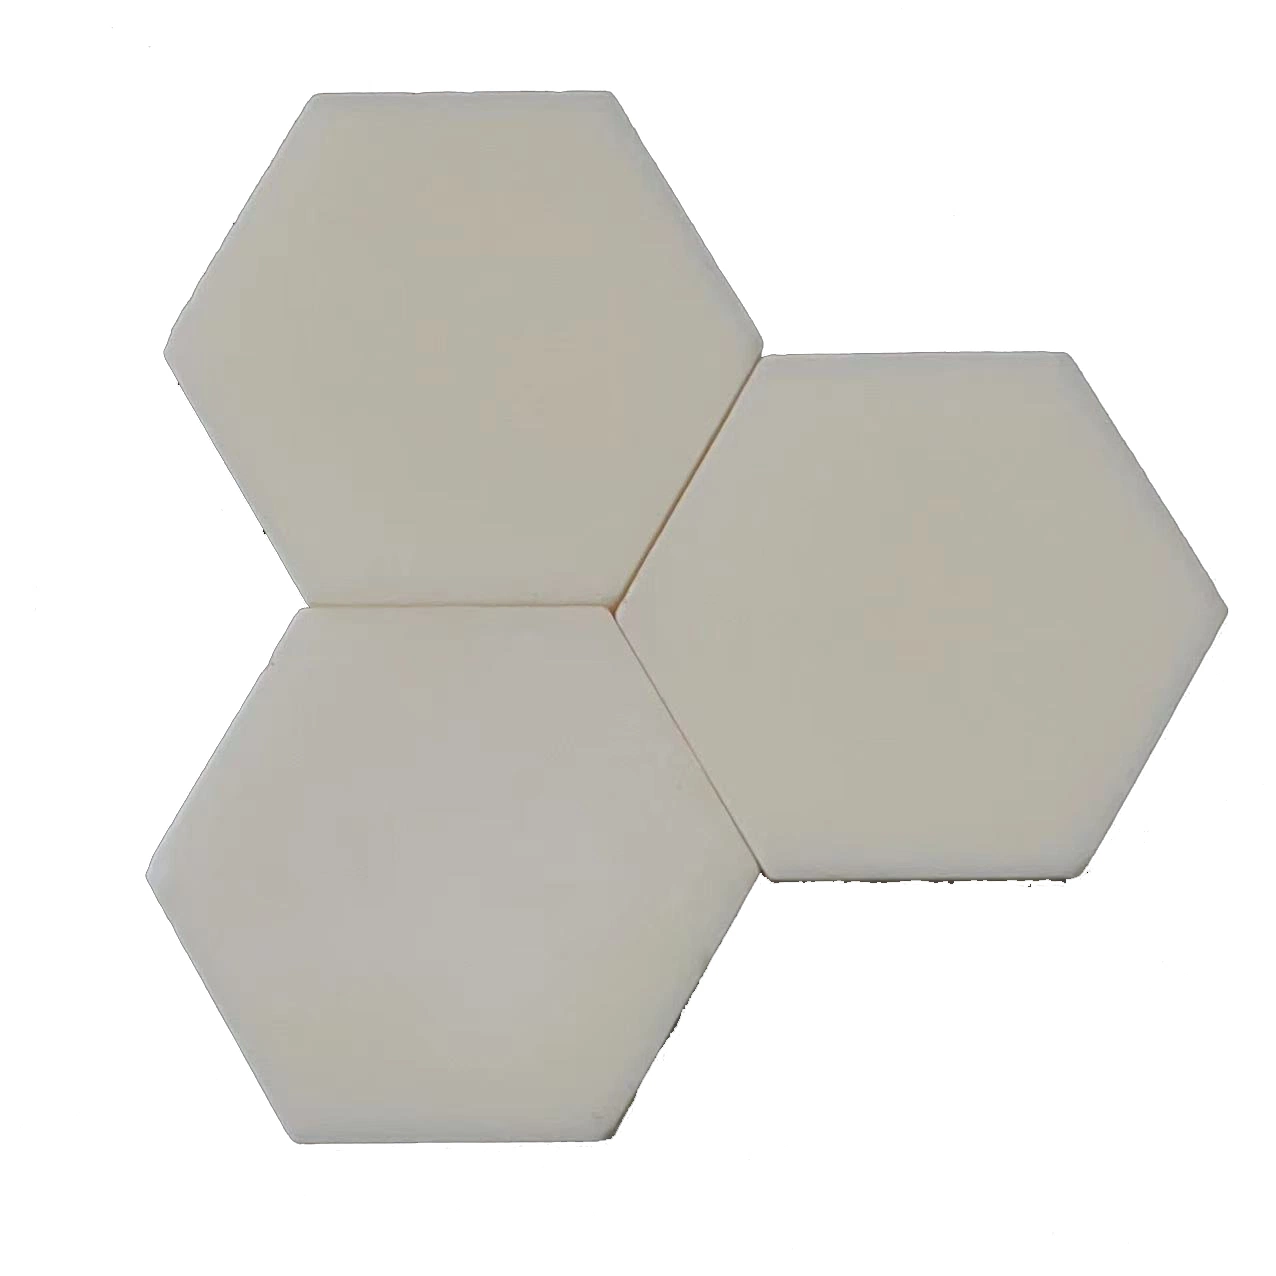 White 99% Wear Protection Alumina Lining Ceramic Plate for Military Uniform